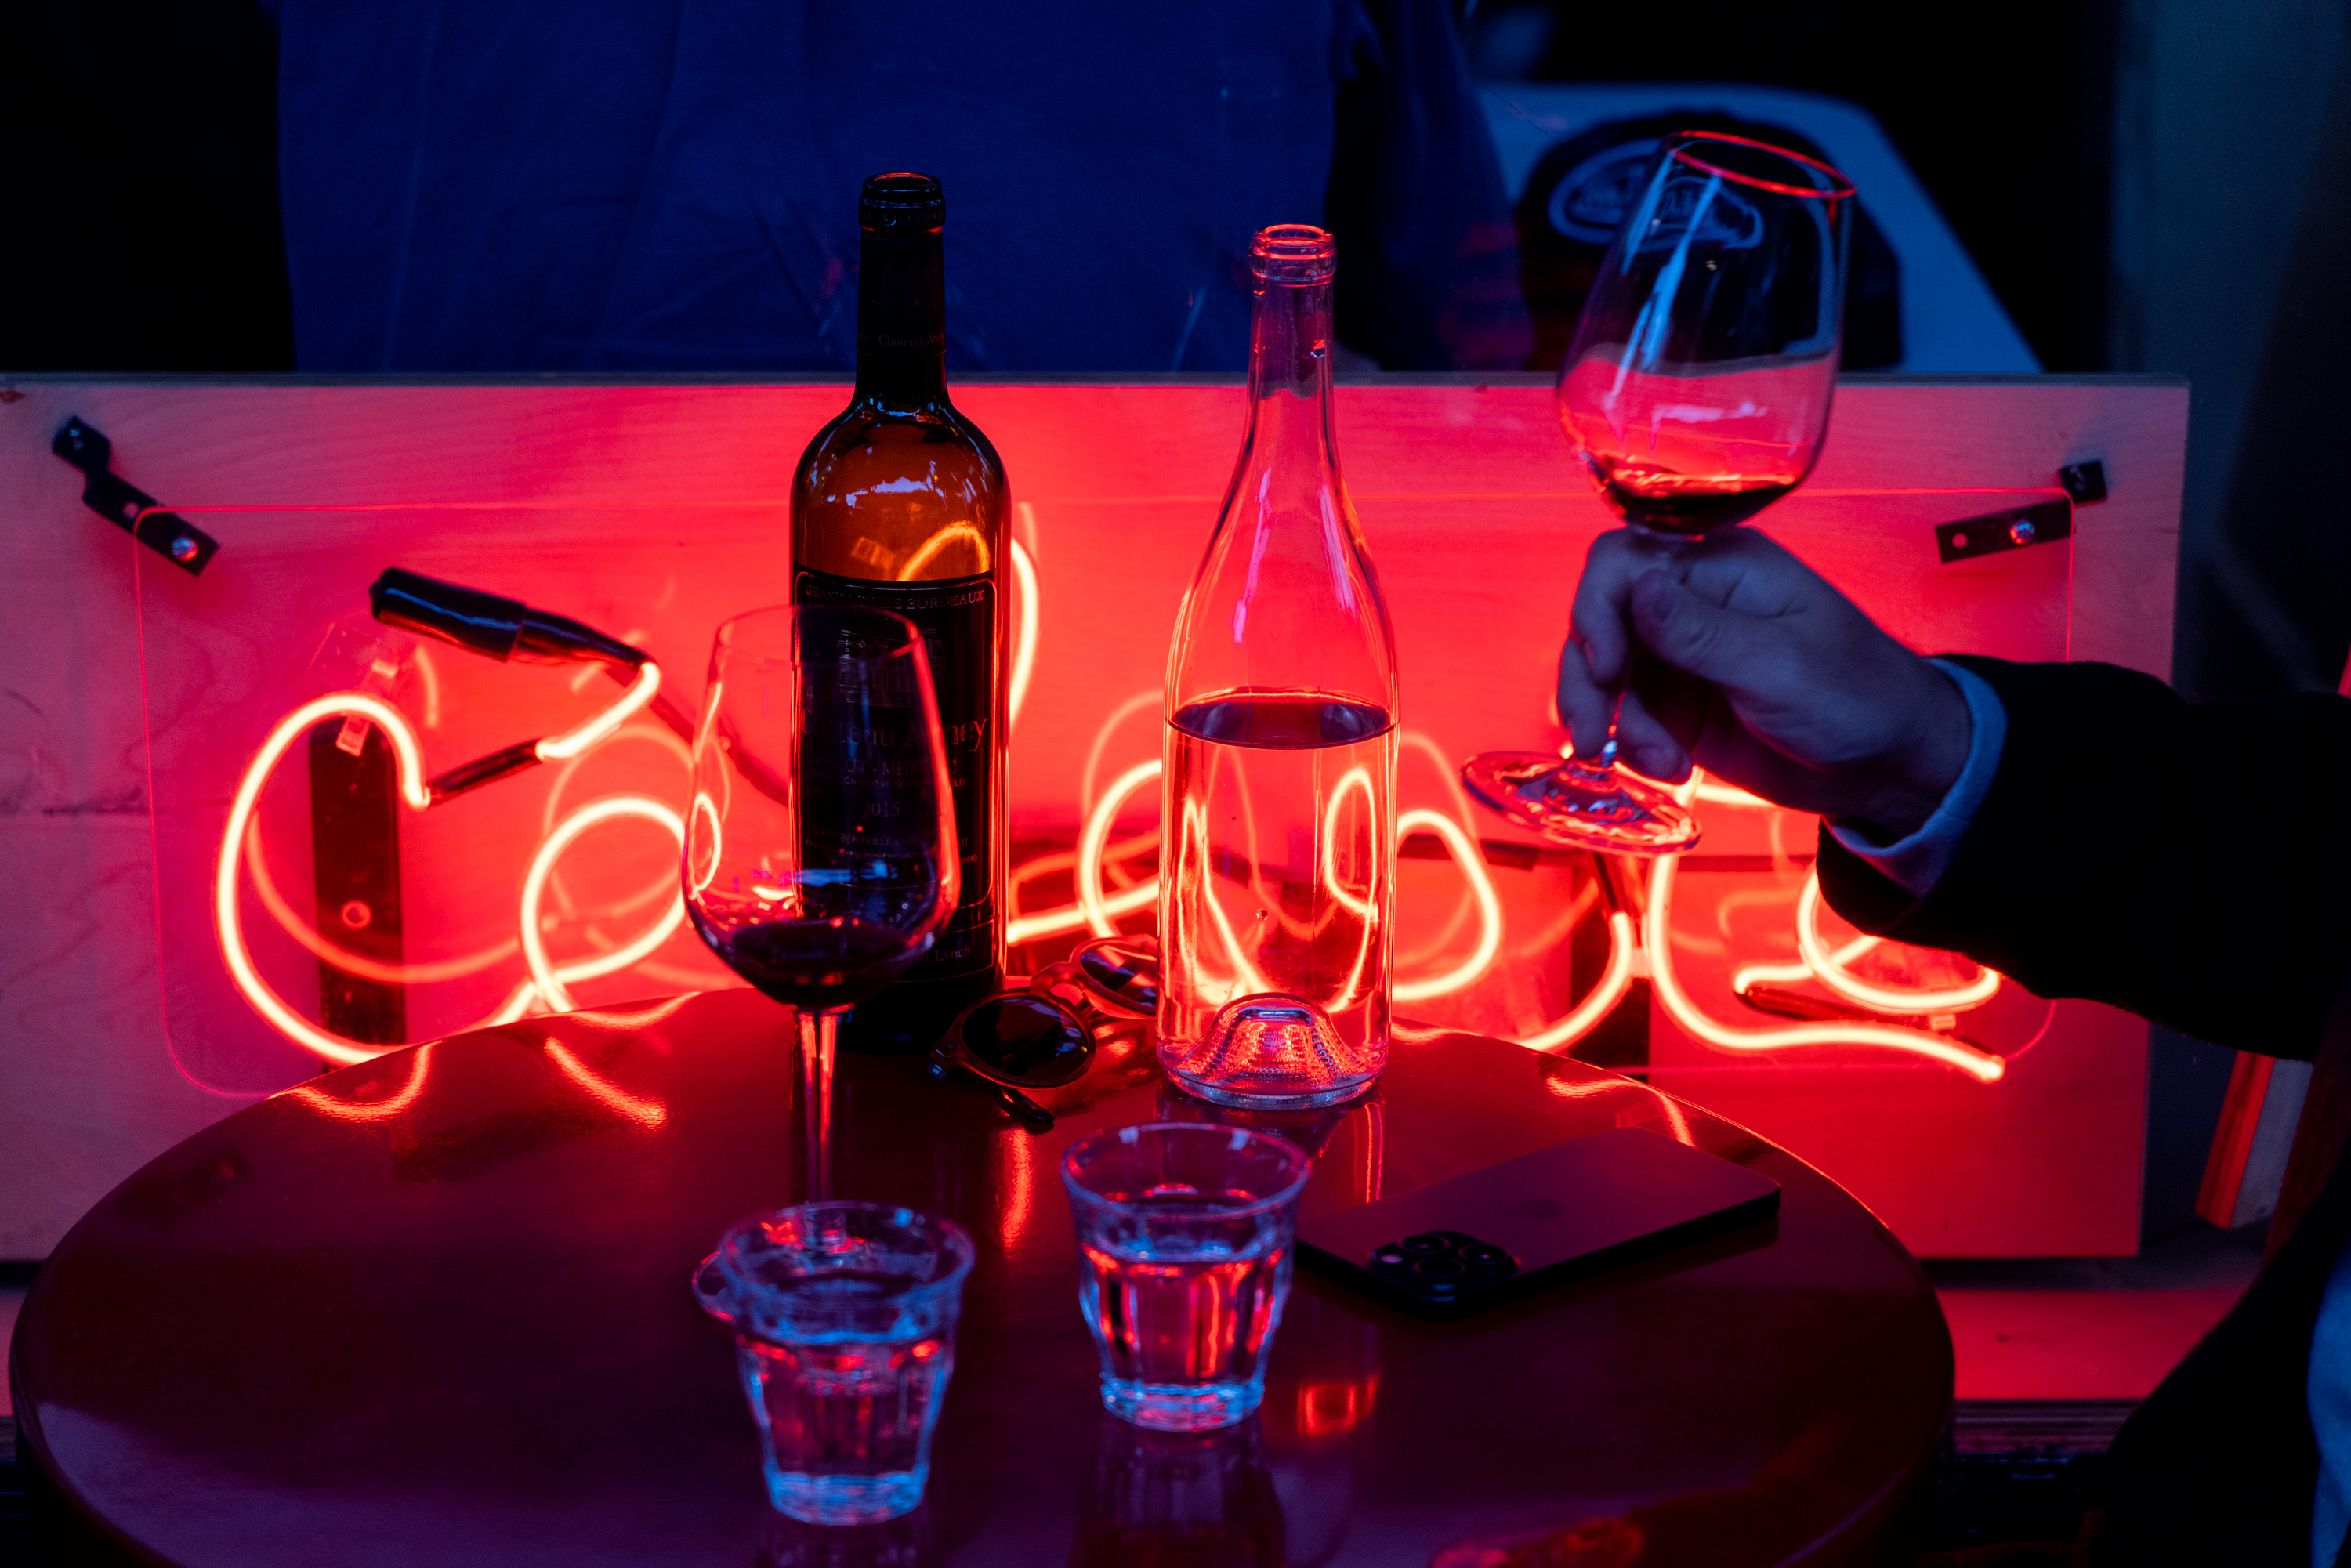 A hand holding a glass of red wine is visible, with a bottle, water glass, and phone on a table. A red neon light in the background creates a vibrant ambiance.